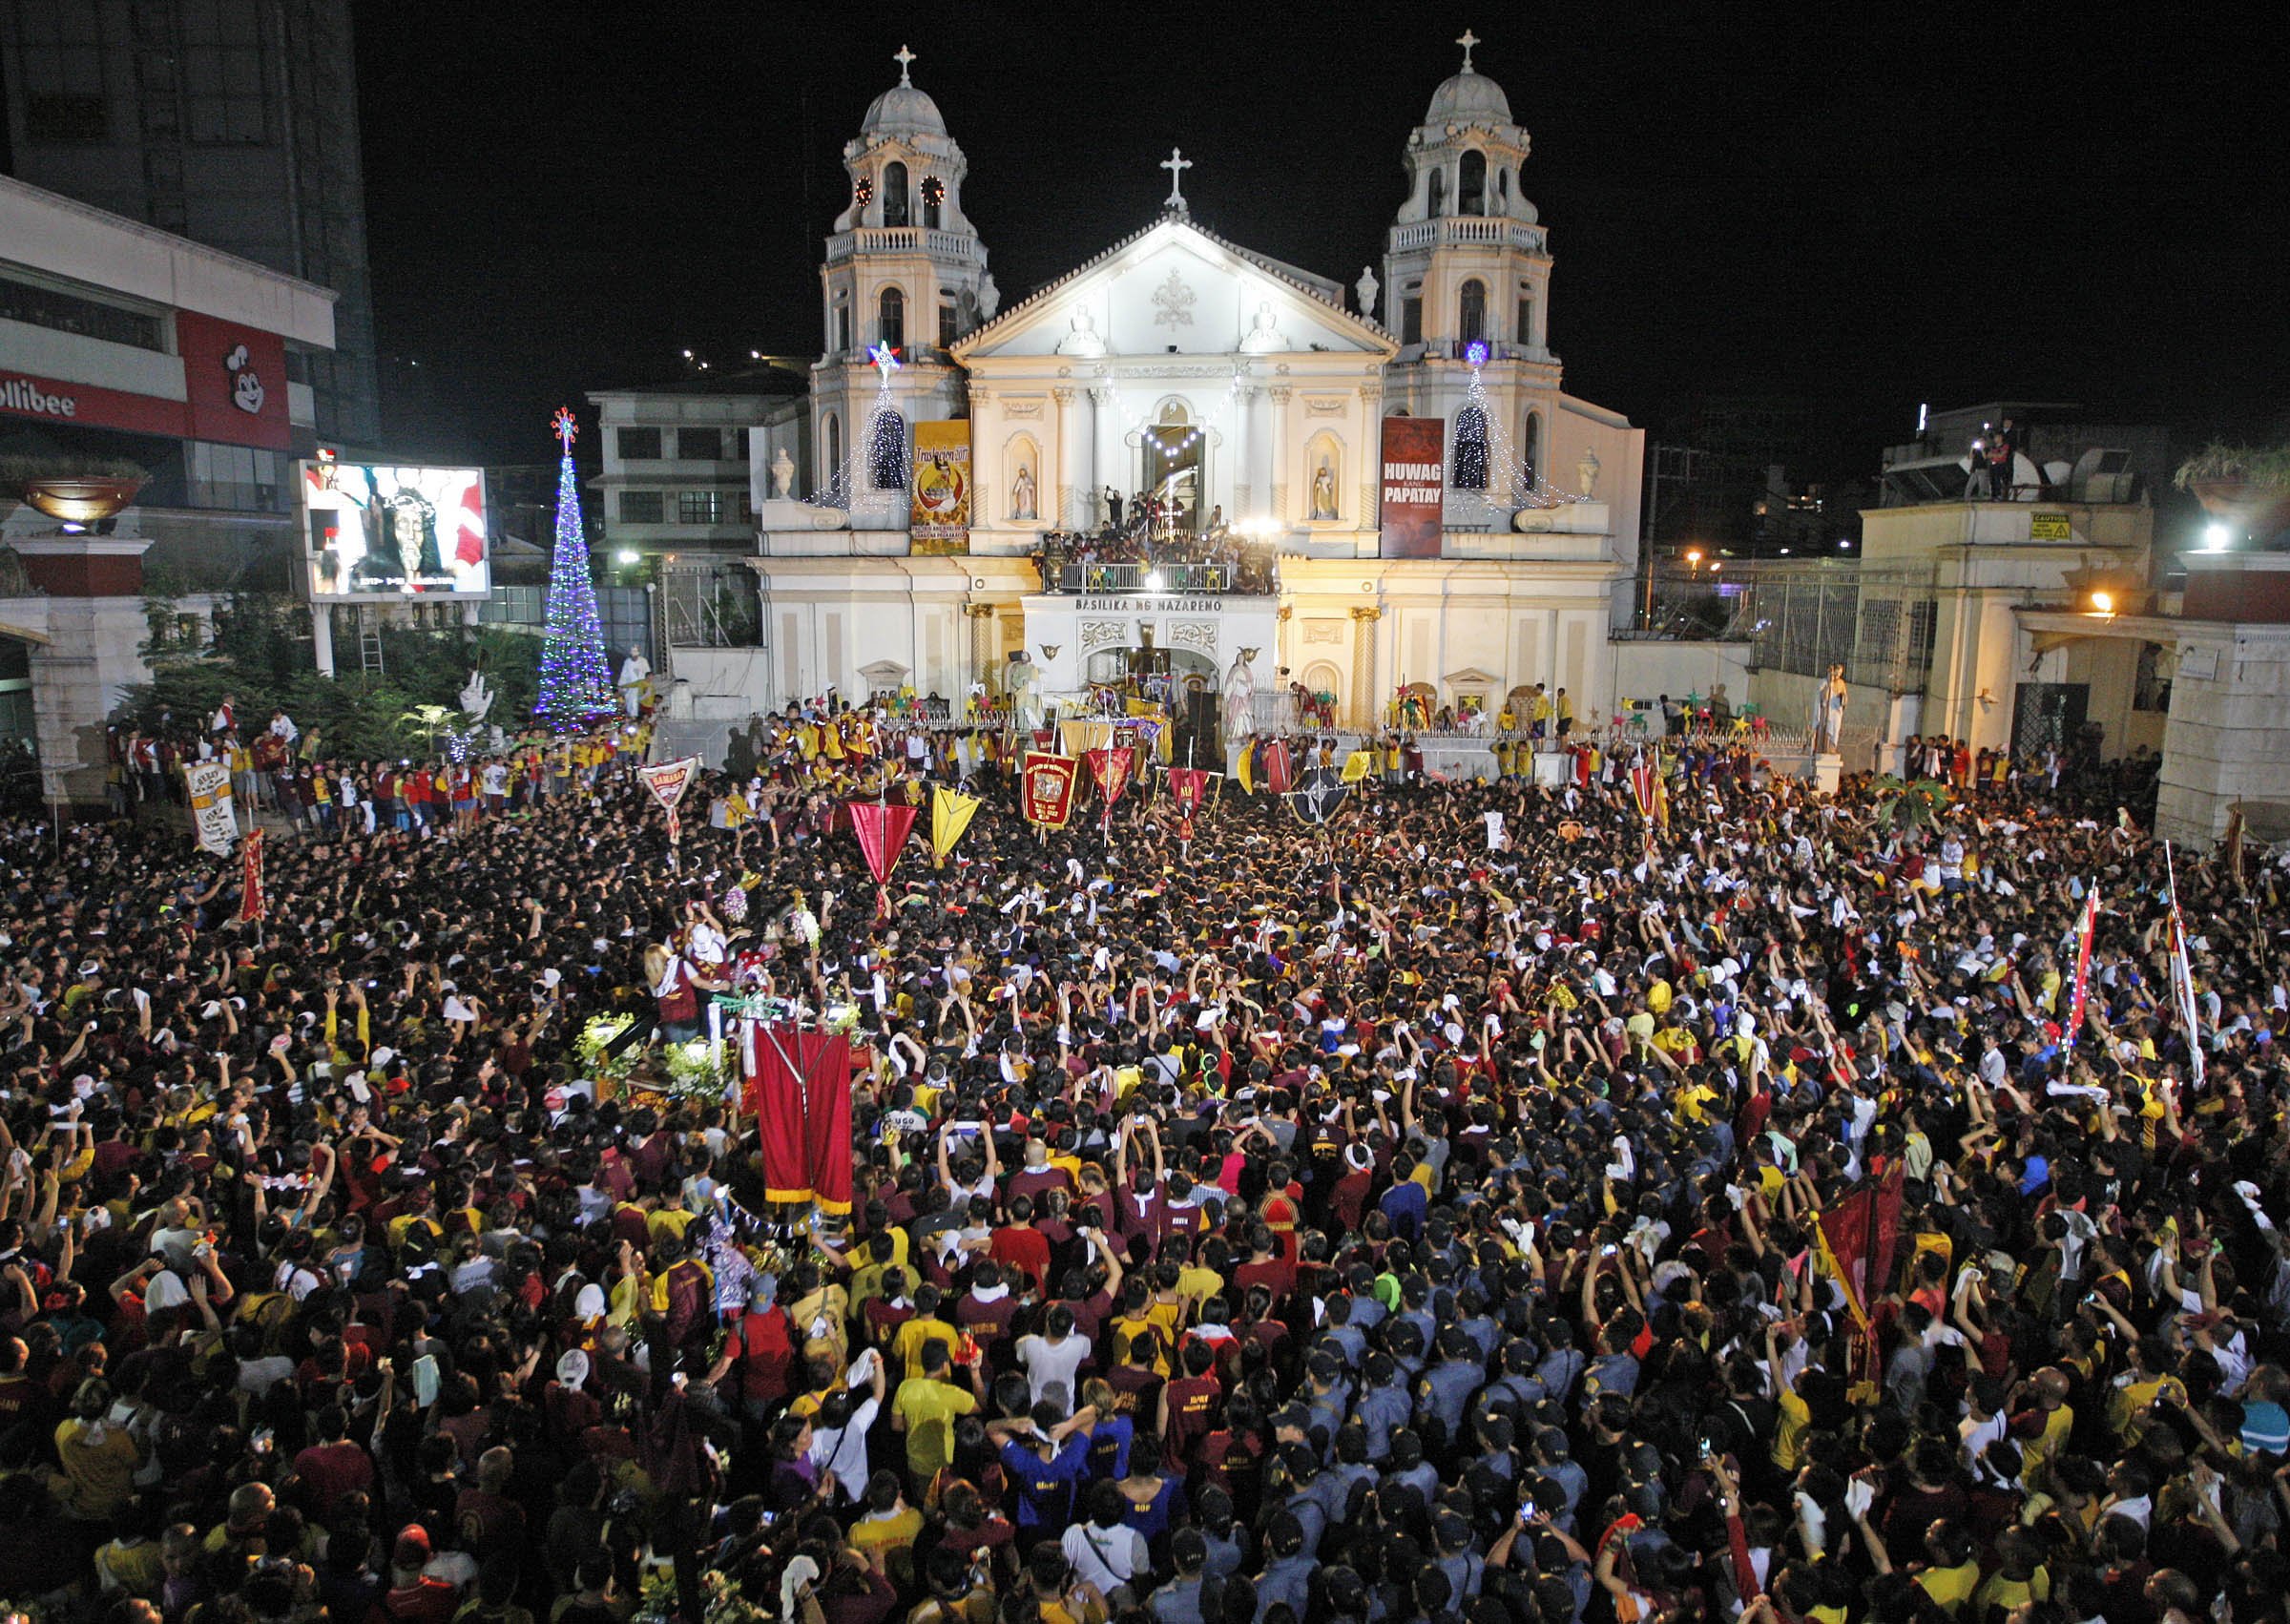 More than 22 hours 'Traslacion 2017' of the Feast of the Black Nazarene